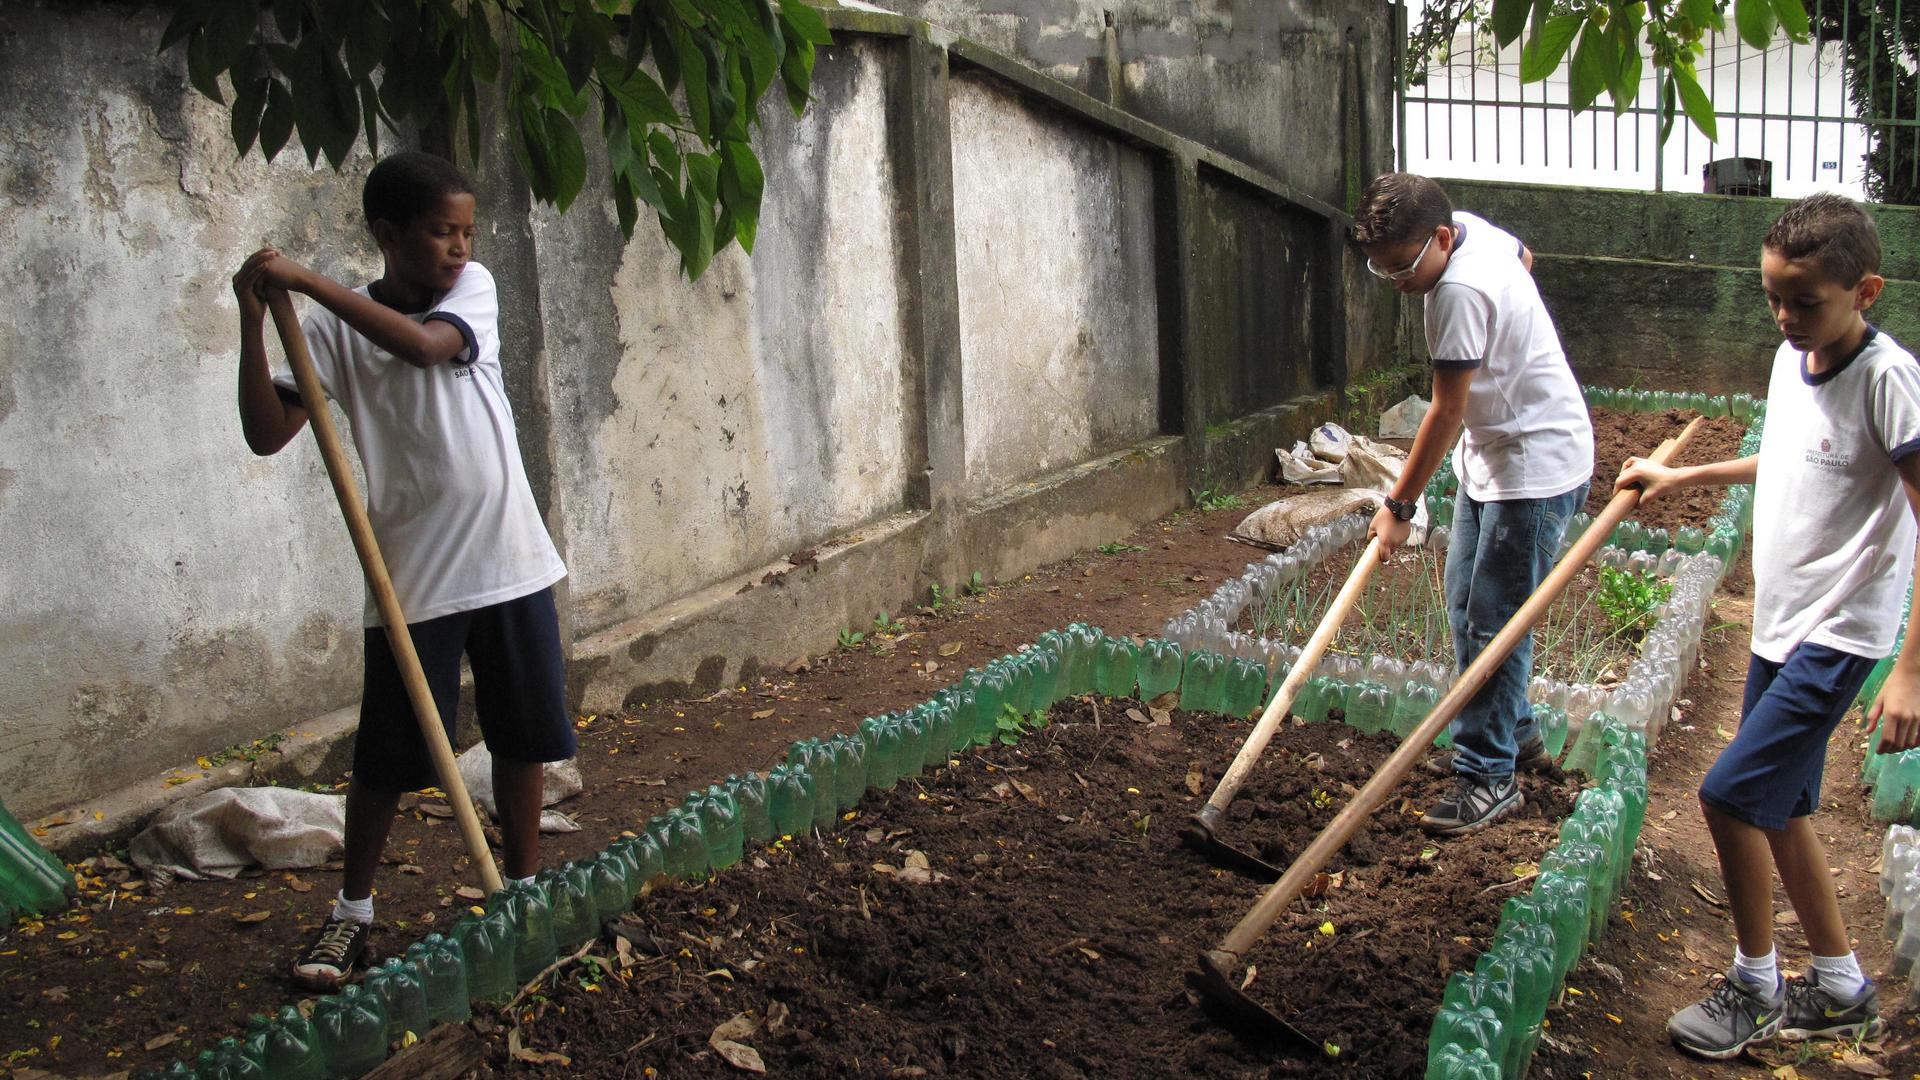 Sixth-graders at the Leão Machado school in Sao Paulo. School gardens have become a popular way to help kids learn to eat healthier in Brazil.